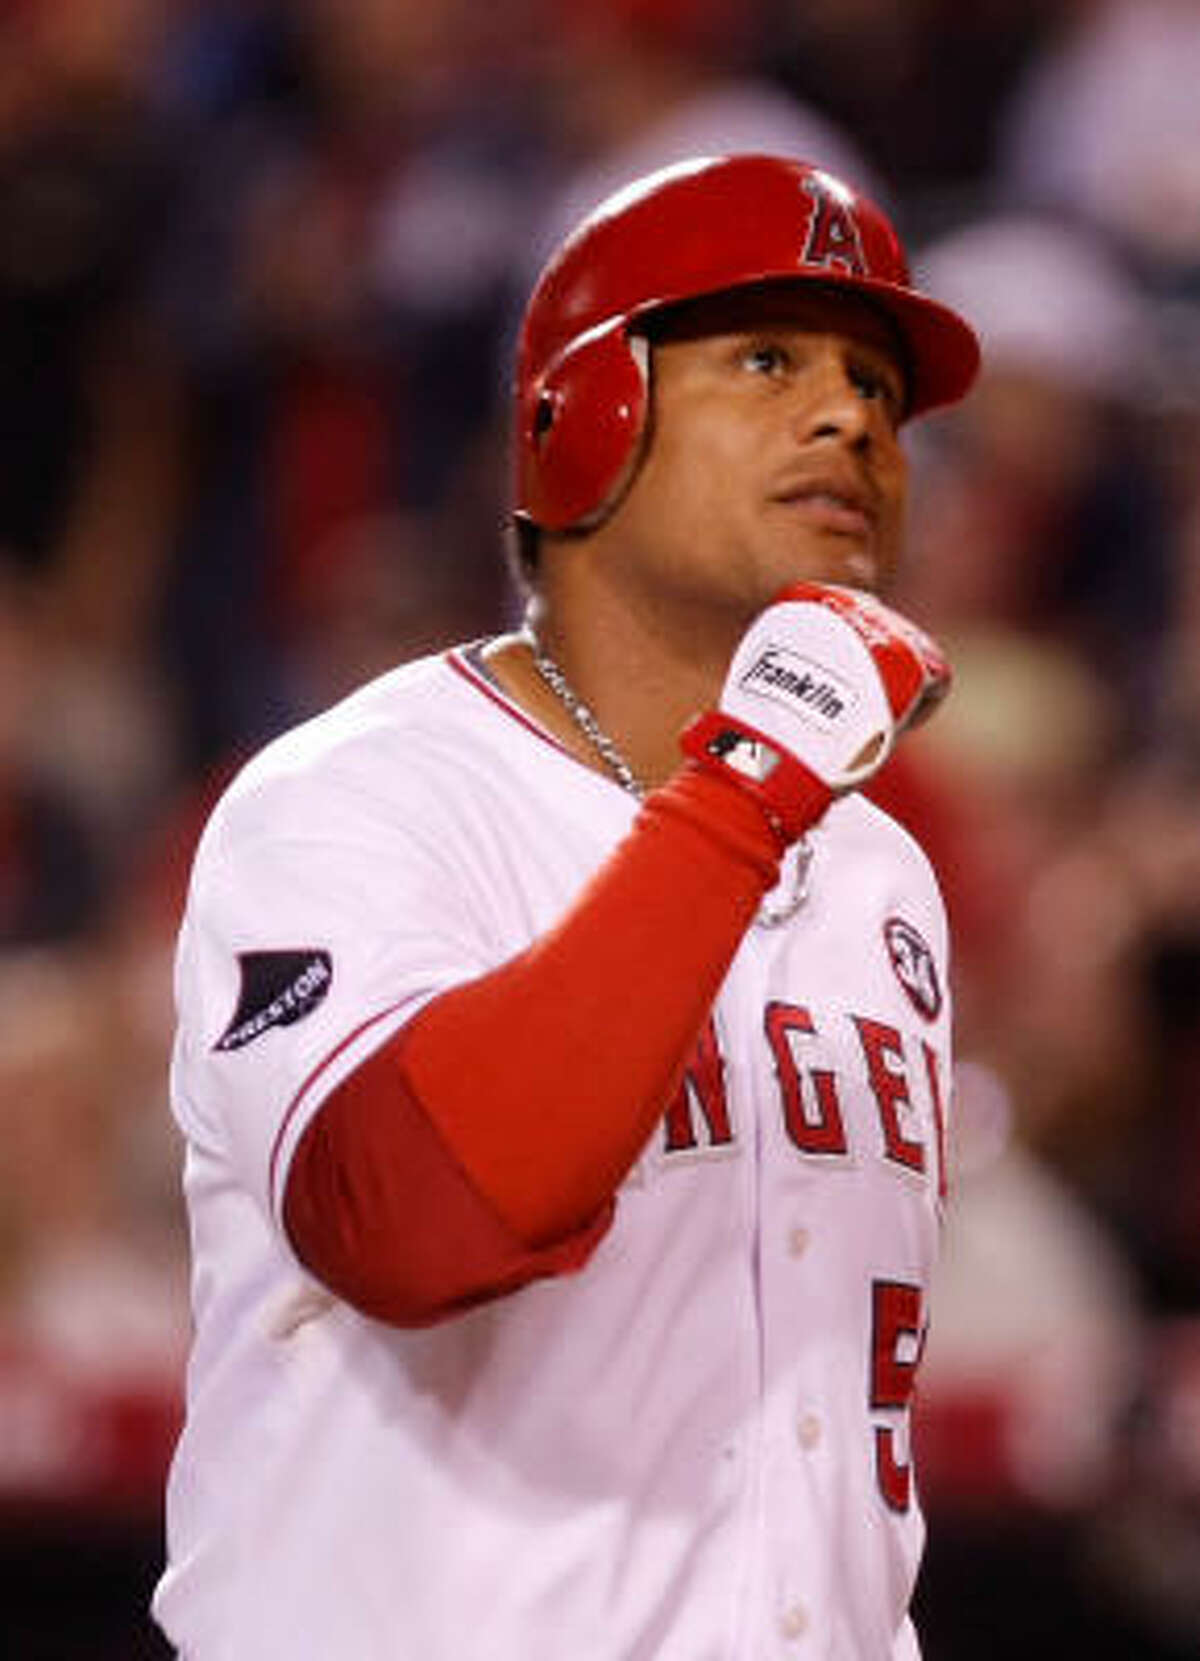 Bobby Abreu, Angels Then: Product of Astros' Venezuelan development efforts saw limited action in 1996 and 1997 before Devil Rays plucked him in expansion draft and traded him to Philadelphia. Now: Regular right fielder for the Angels, still one of the top on-base performers in baseball. Abreu had a run in the Angels 5-0 victory in Game 1.